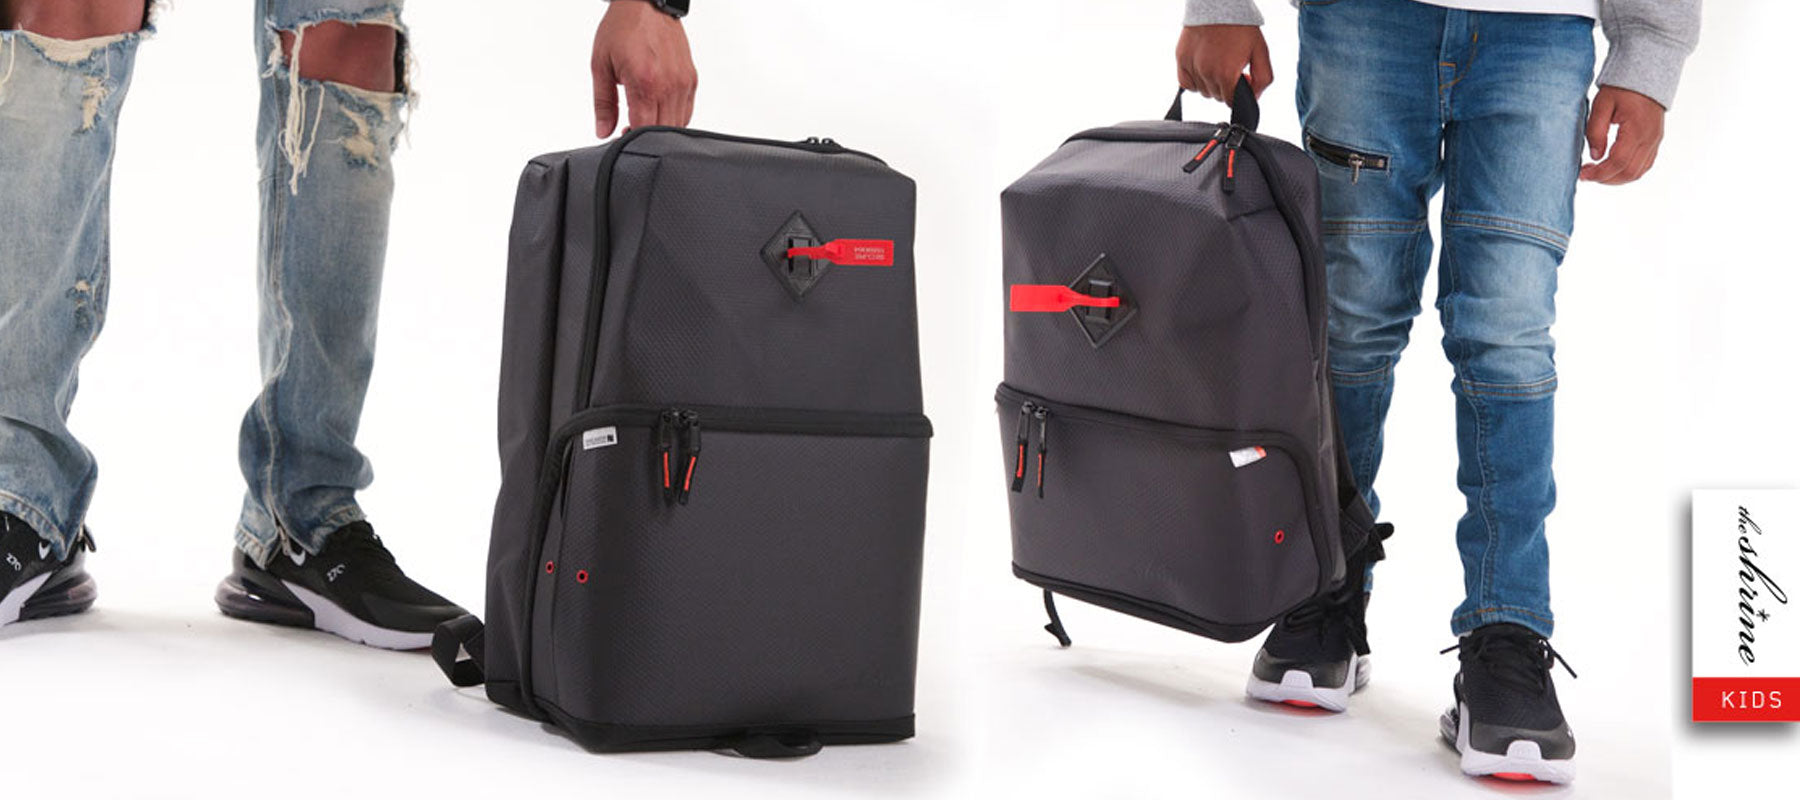 THE SHRINE LAUNCHES NEW KID SIZED SNEAKER DAYPACKS